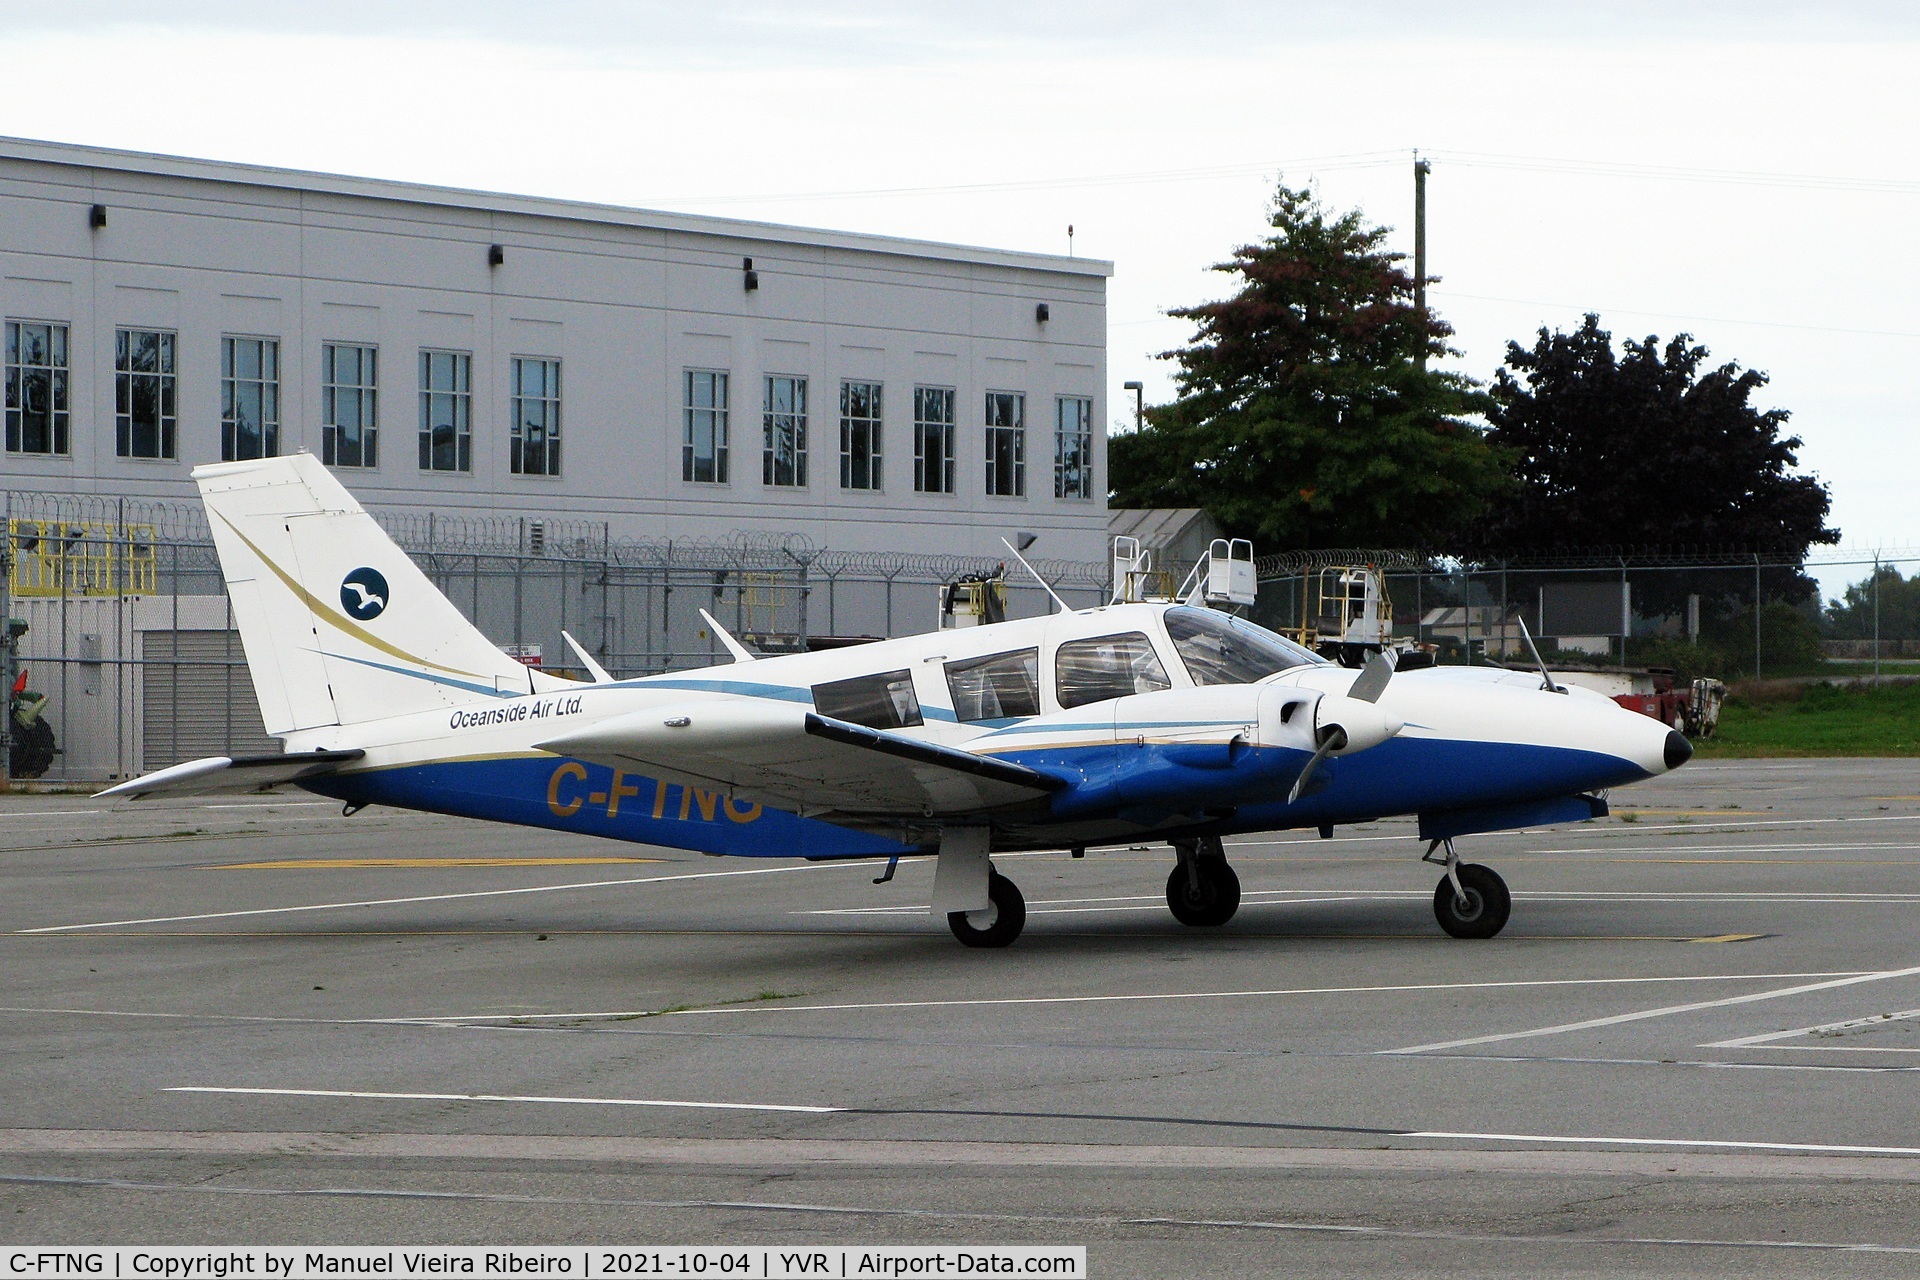 C-FTNG, 1972 Piper PA-34-200 C/N 34-7250085, Seen at YVR